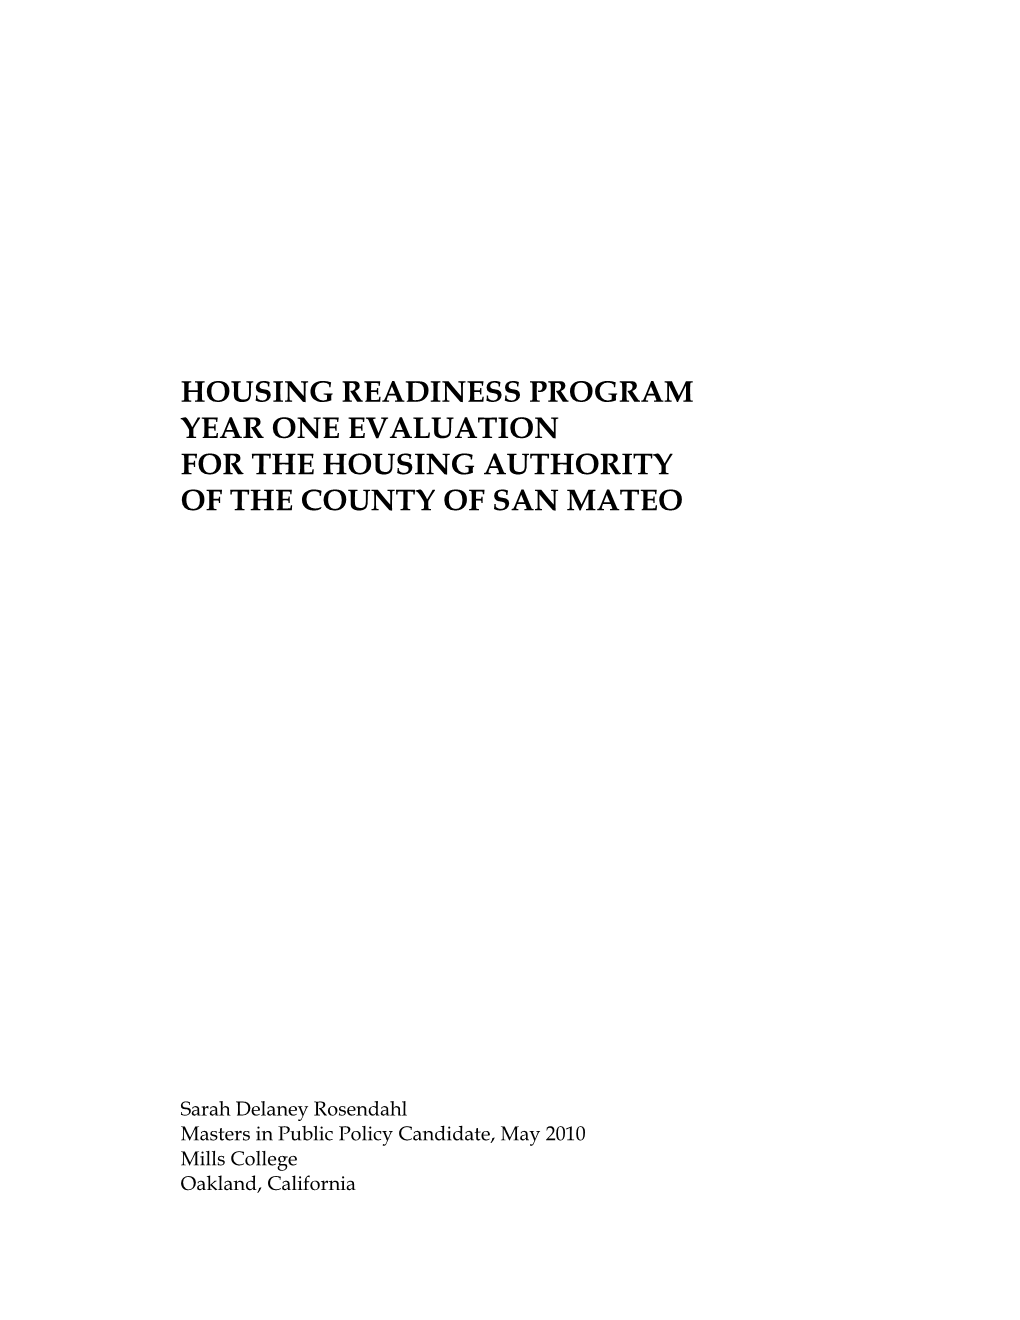 Housing Readiness Program Year One Evaluation for the Housing Authority of the County of San Mateo